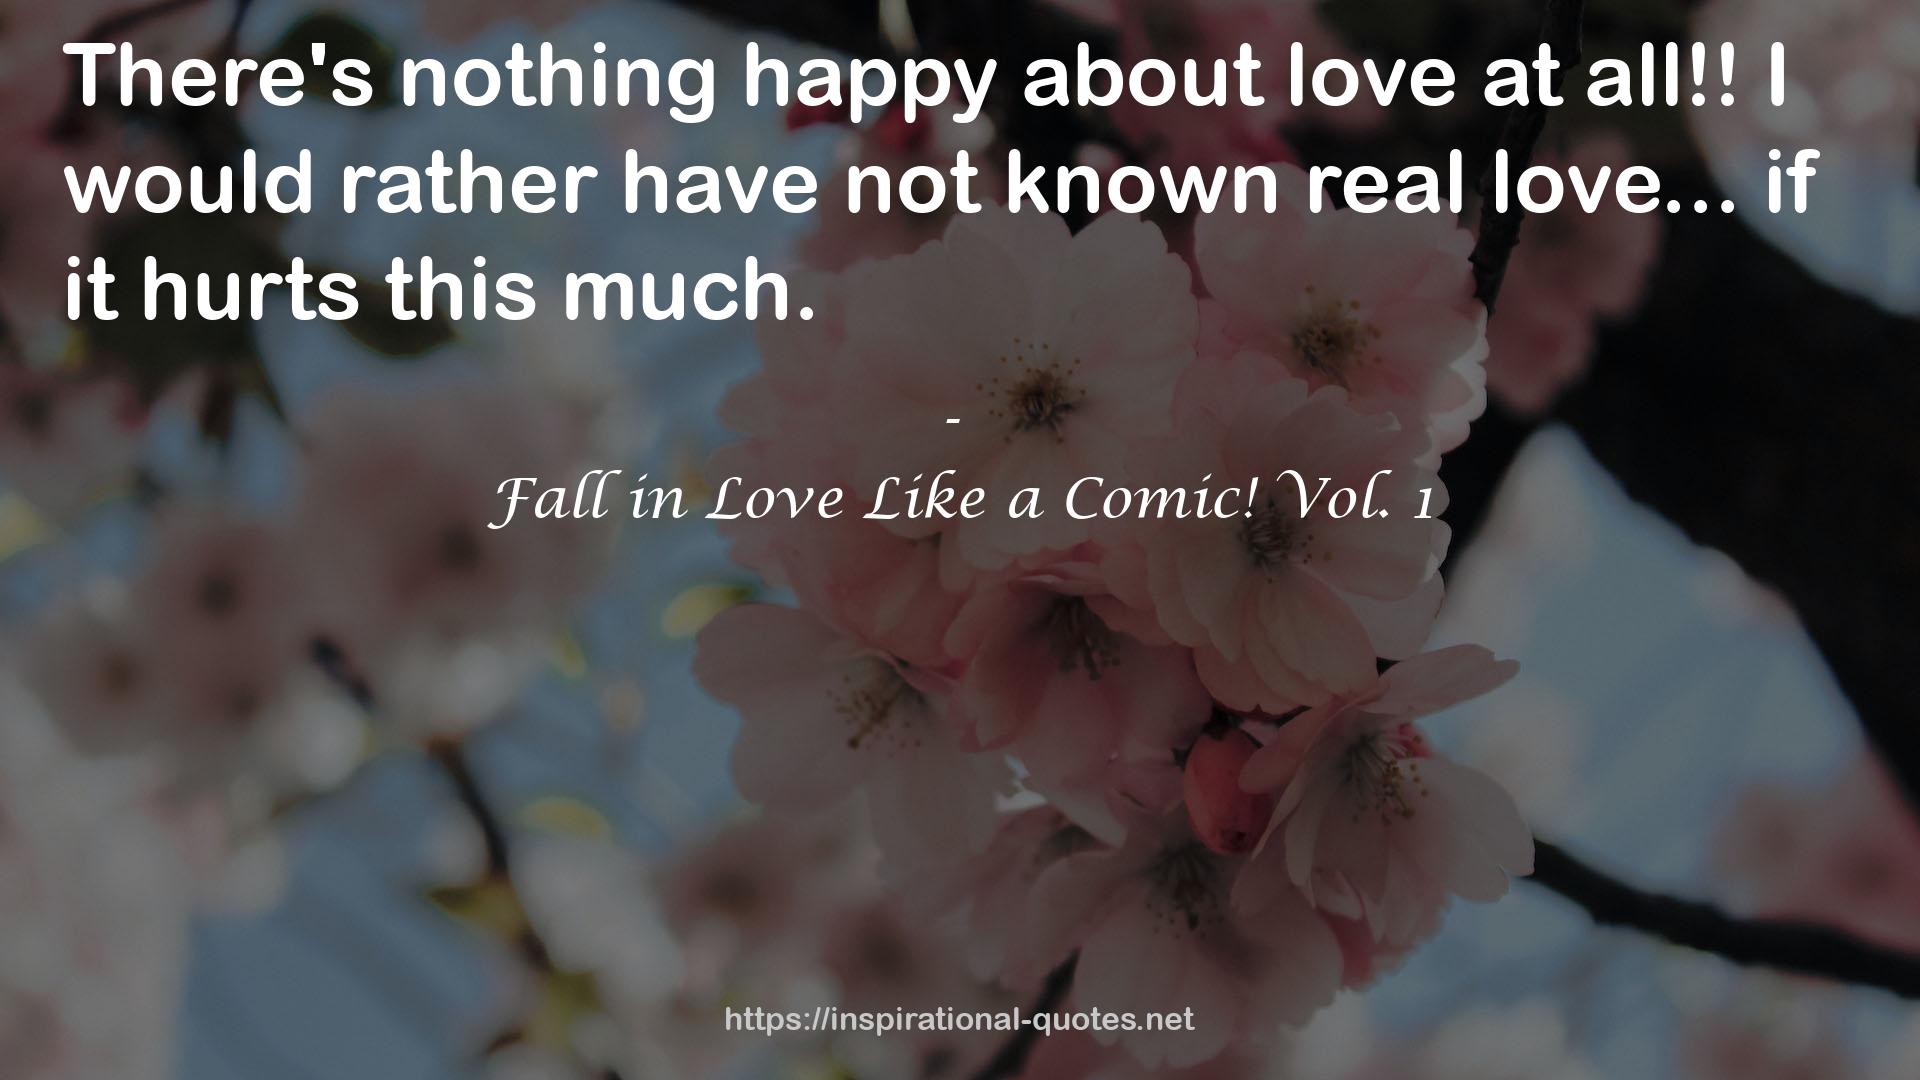 Fall in Love Like a Comic! Vol. 1 QUOTES